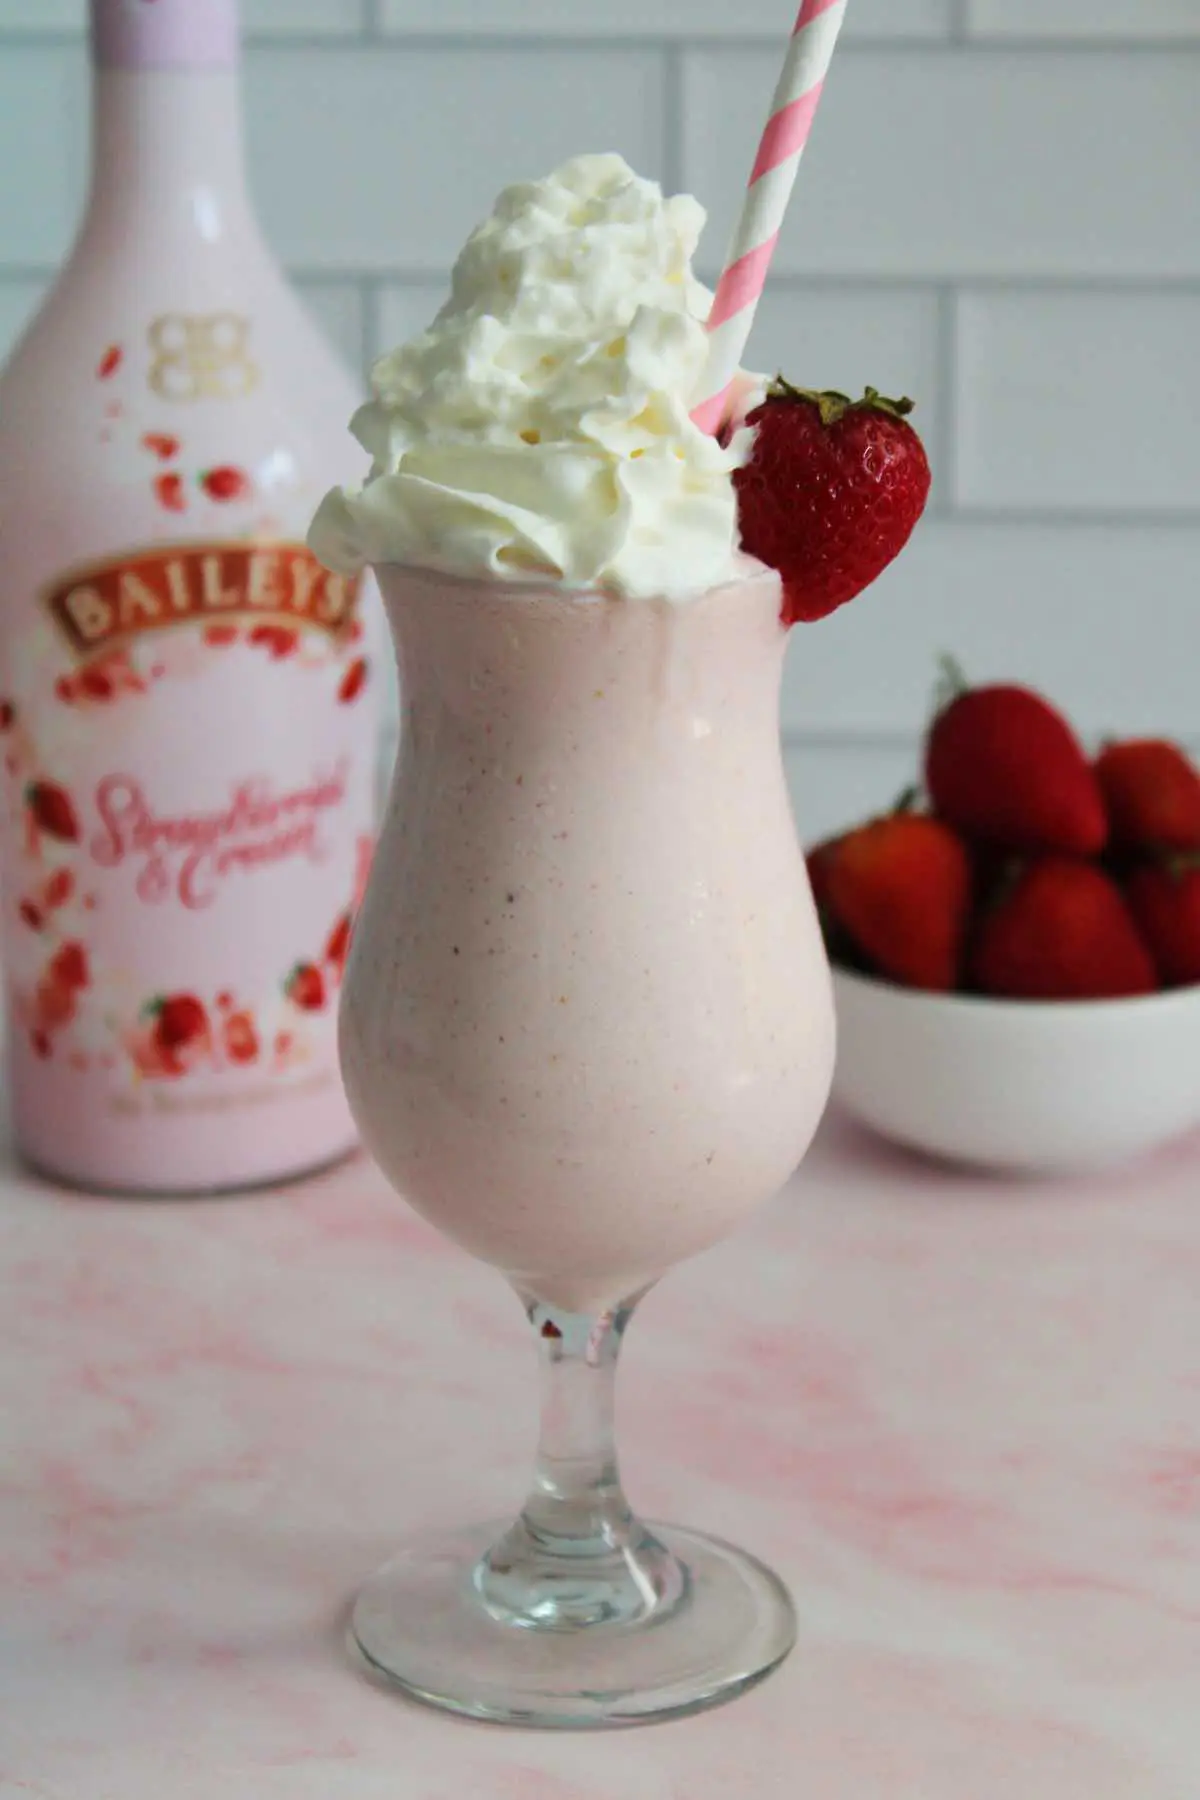 Strawberry Bailey's milkshake made right at home.